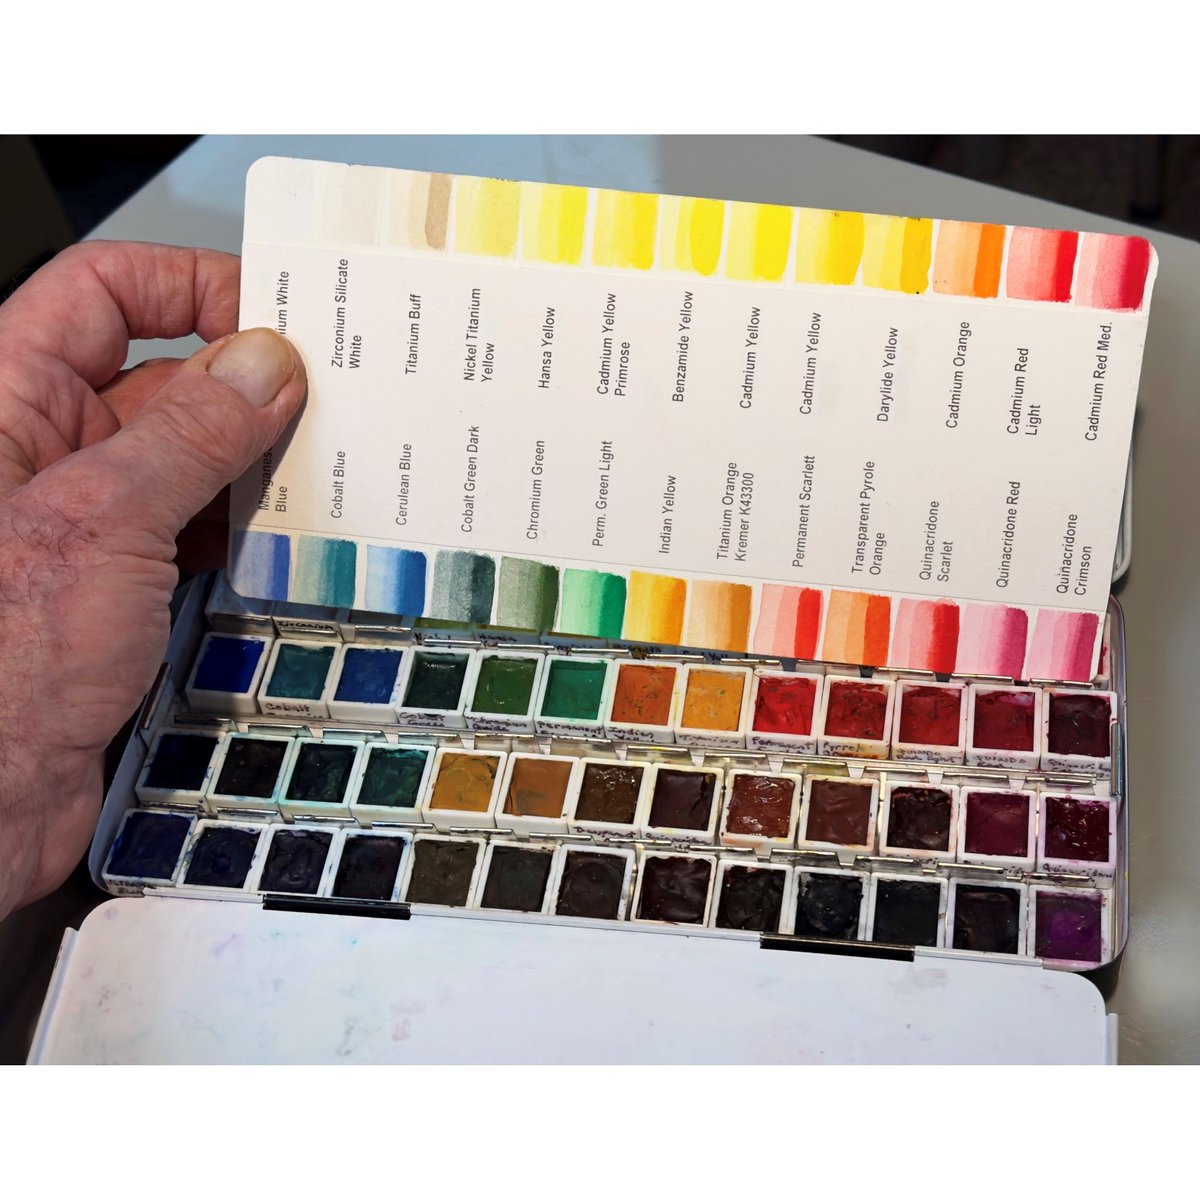 Interested in using QoR Watercolor paints for inpainting? Fiona Rutka, PSG Publications Chair, has compiled tips & tricks on all things QoR from many conservators, including James Bernstein, the instructor of over 44 Mastering Inpainting workshops: community.culturalheritage.org/blogs/aic-news… [1/2]